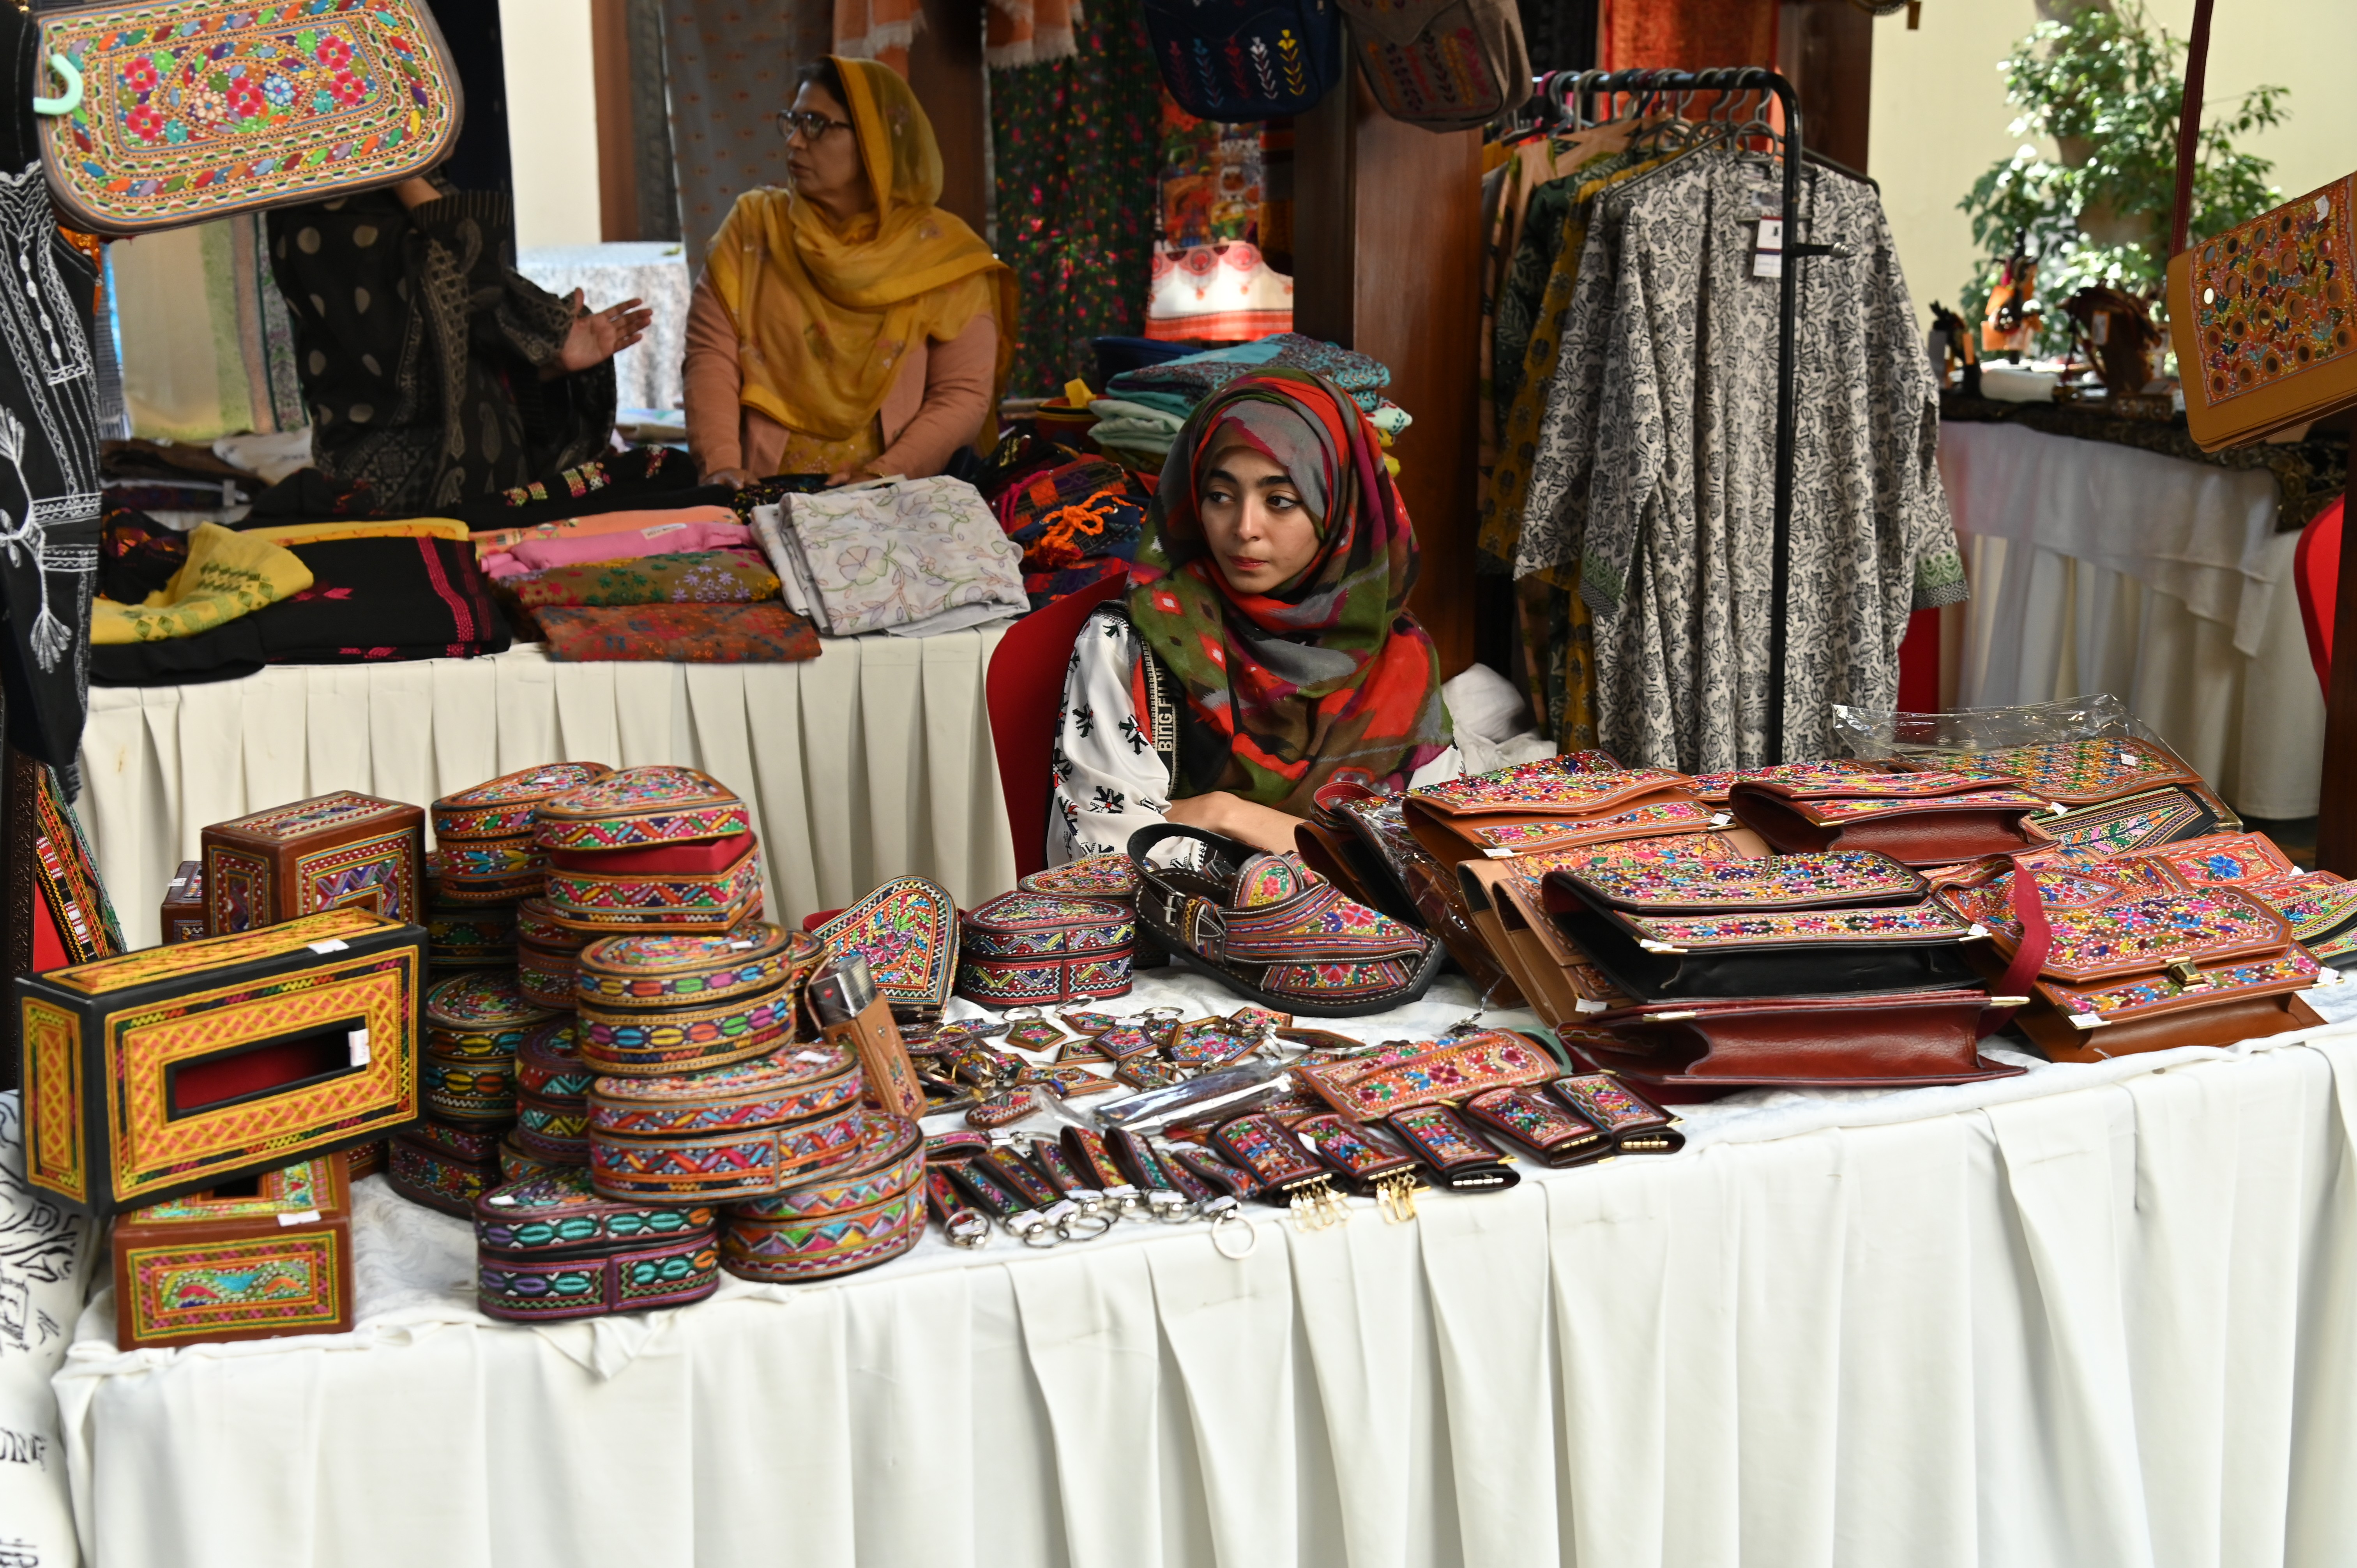 A young girl selling various embroidered objects